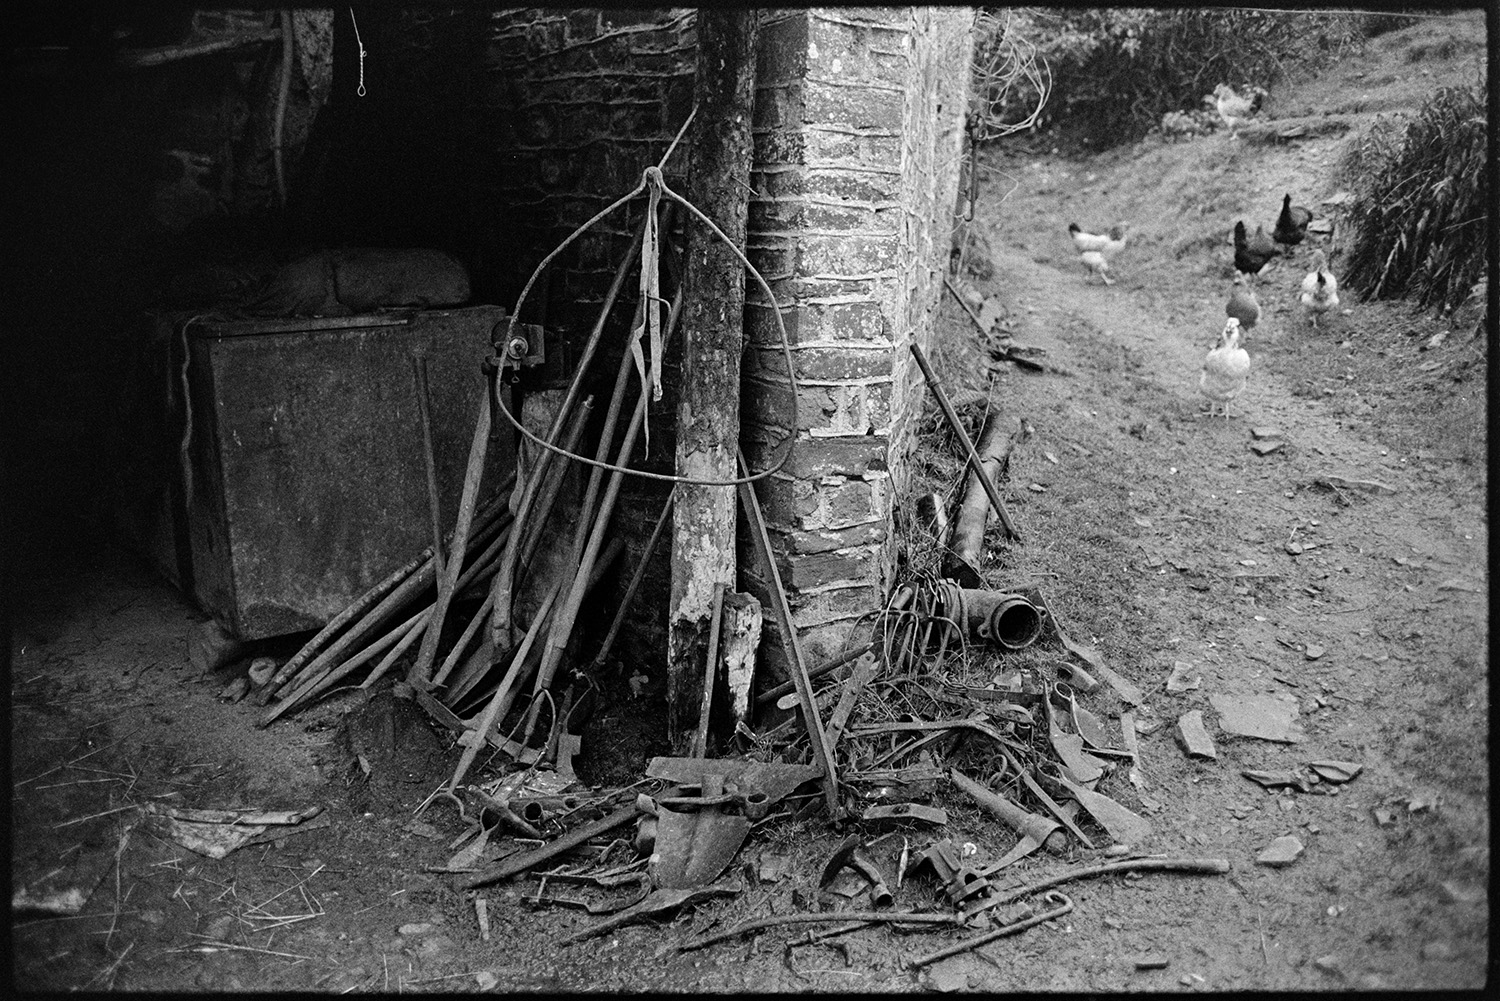 Tools and scrap in shed. <br />
[Items of scrap metal by a brick shed at Millhams in Dolton. A group of chickens are visible on a path running past the shed.]